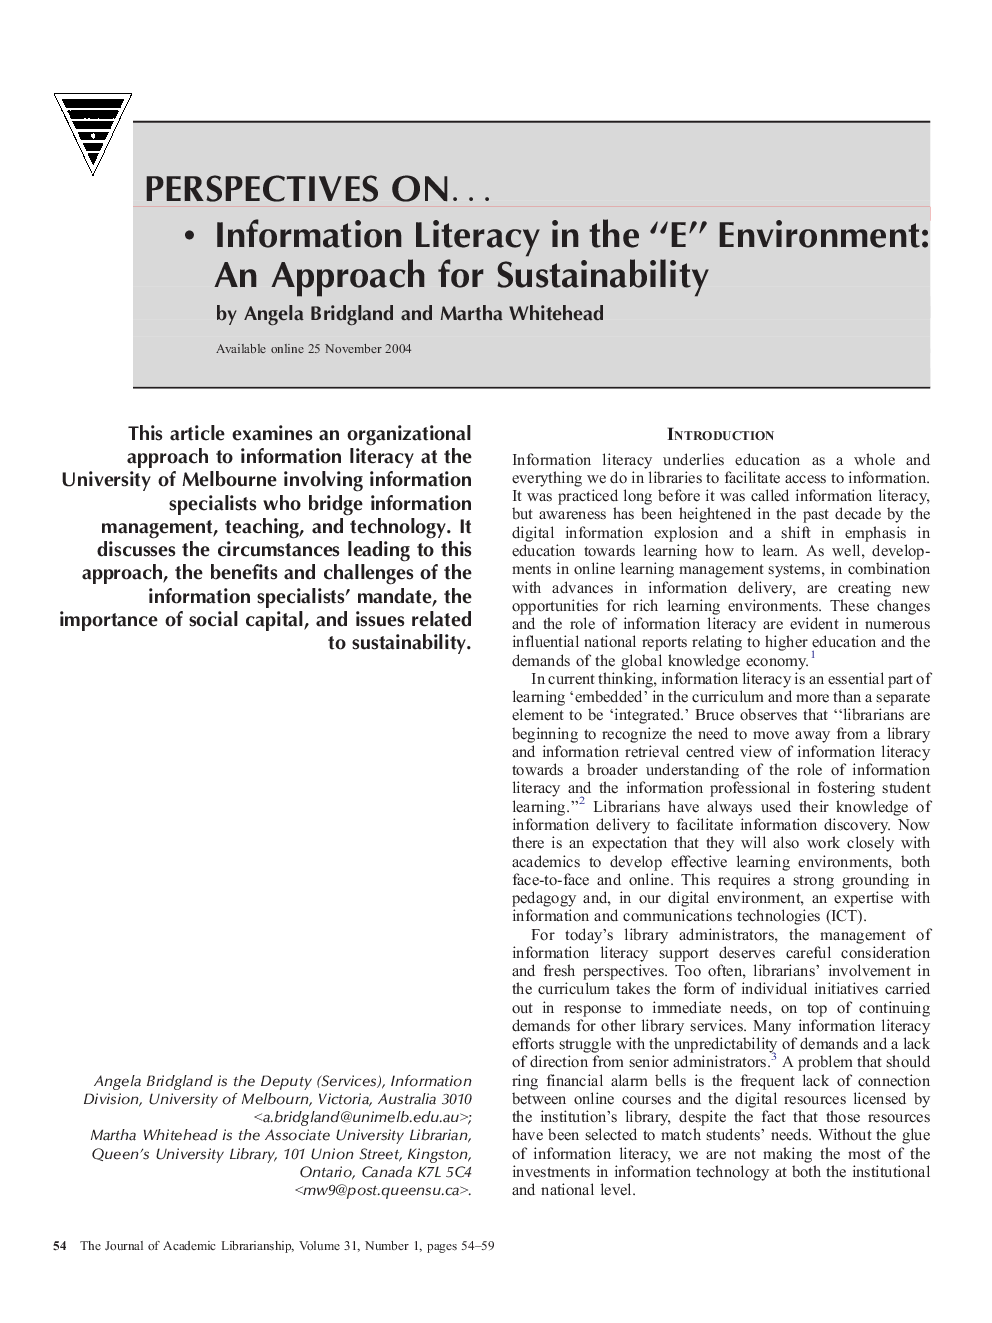 Perspectives On â¦ Information Literacy in the “E” Environment: An Approach for Sustainability